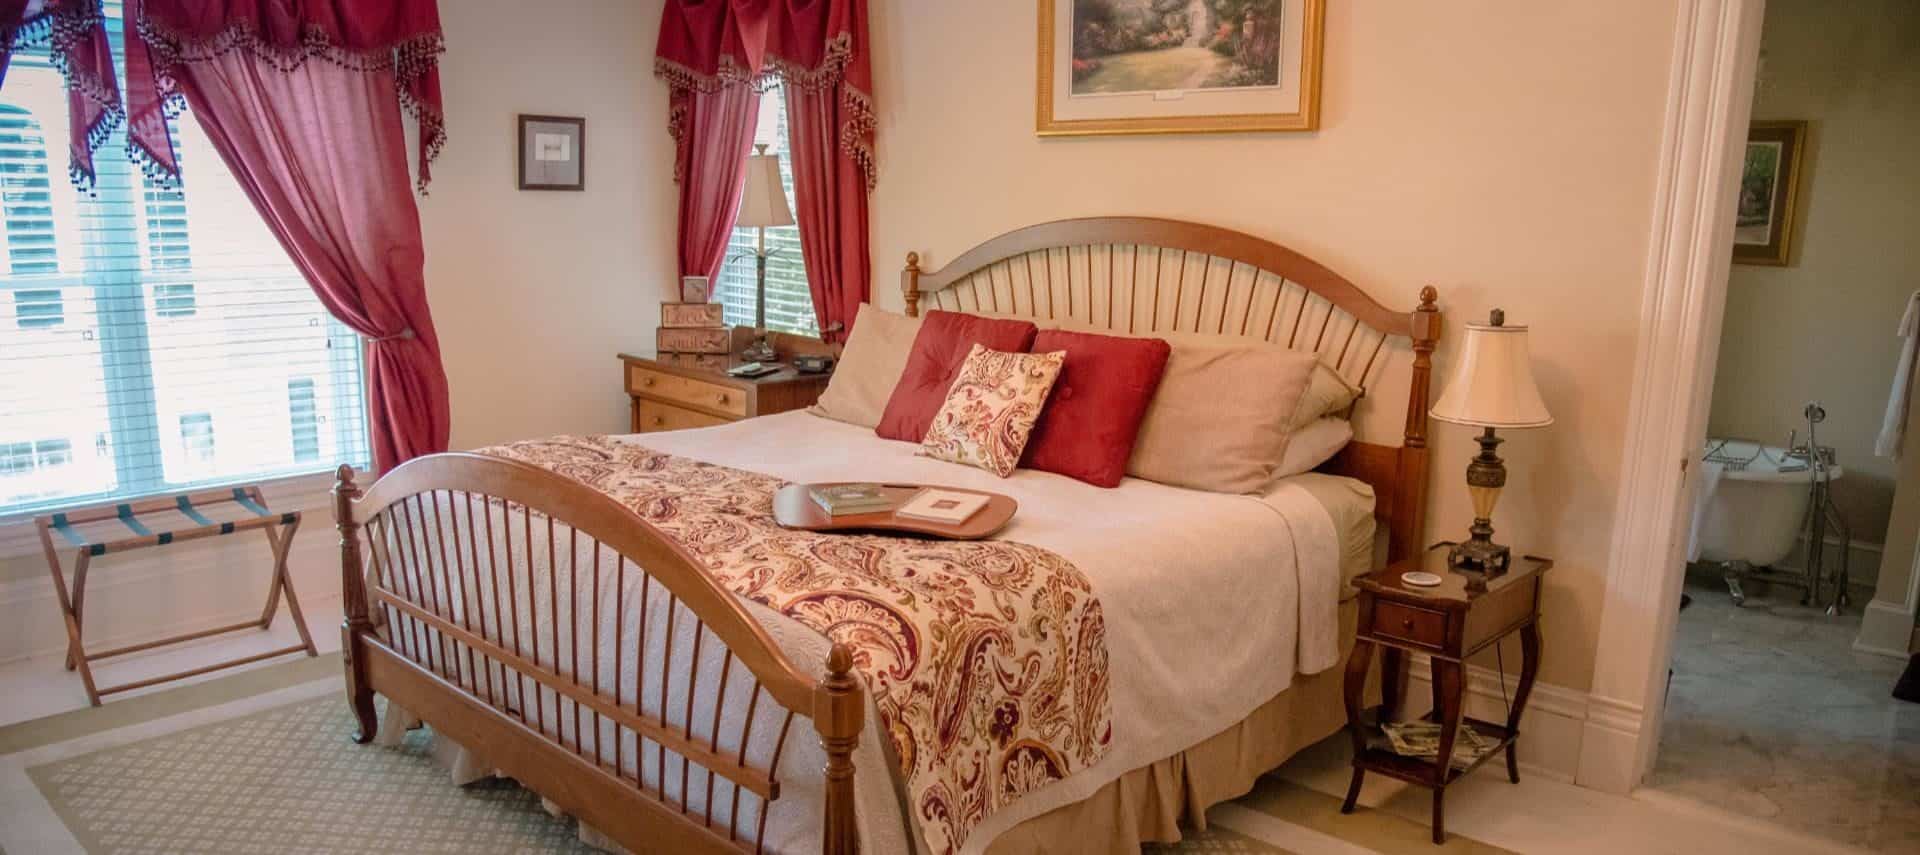 Bedroom with cream walls, wooden furniture and bed, white and tan bedding, and red curtains